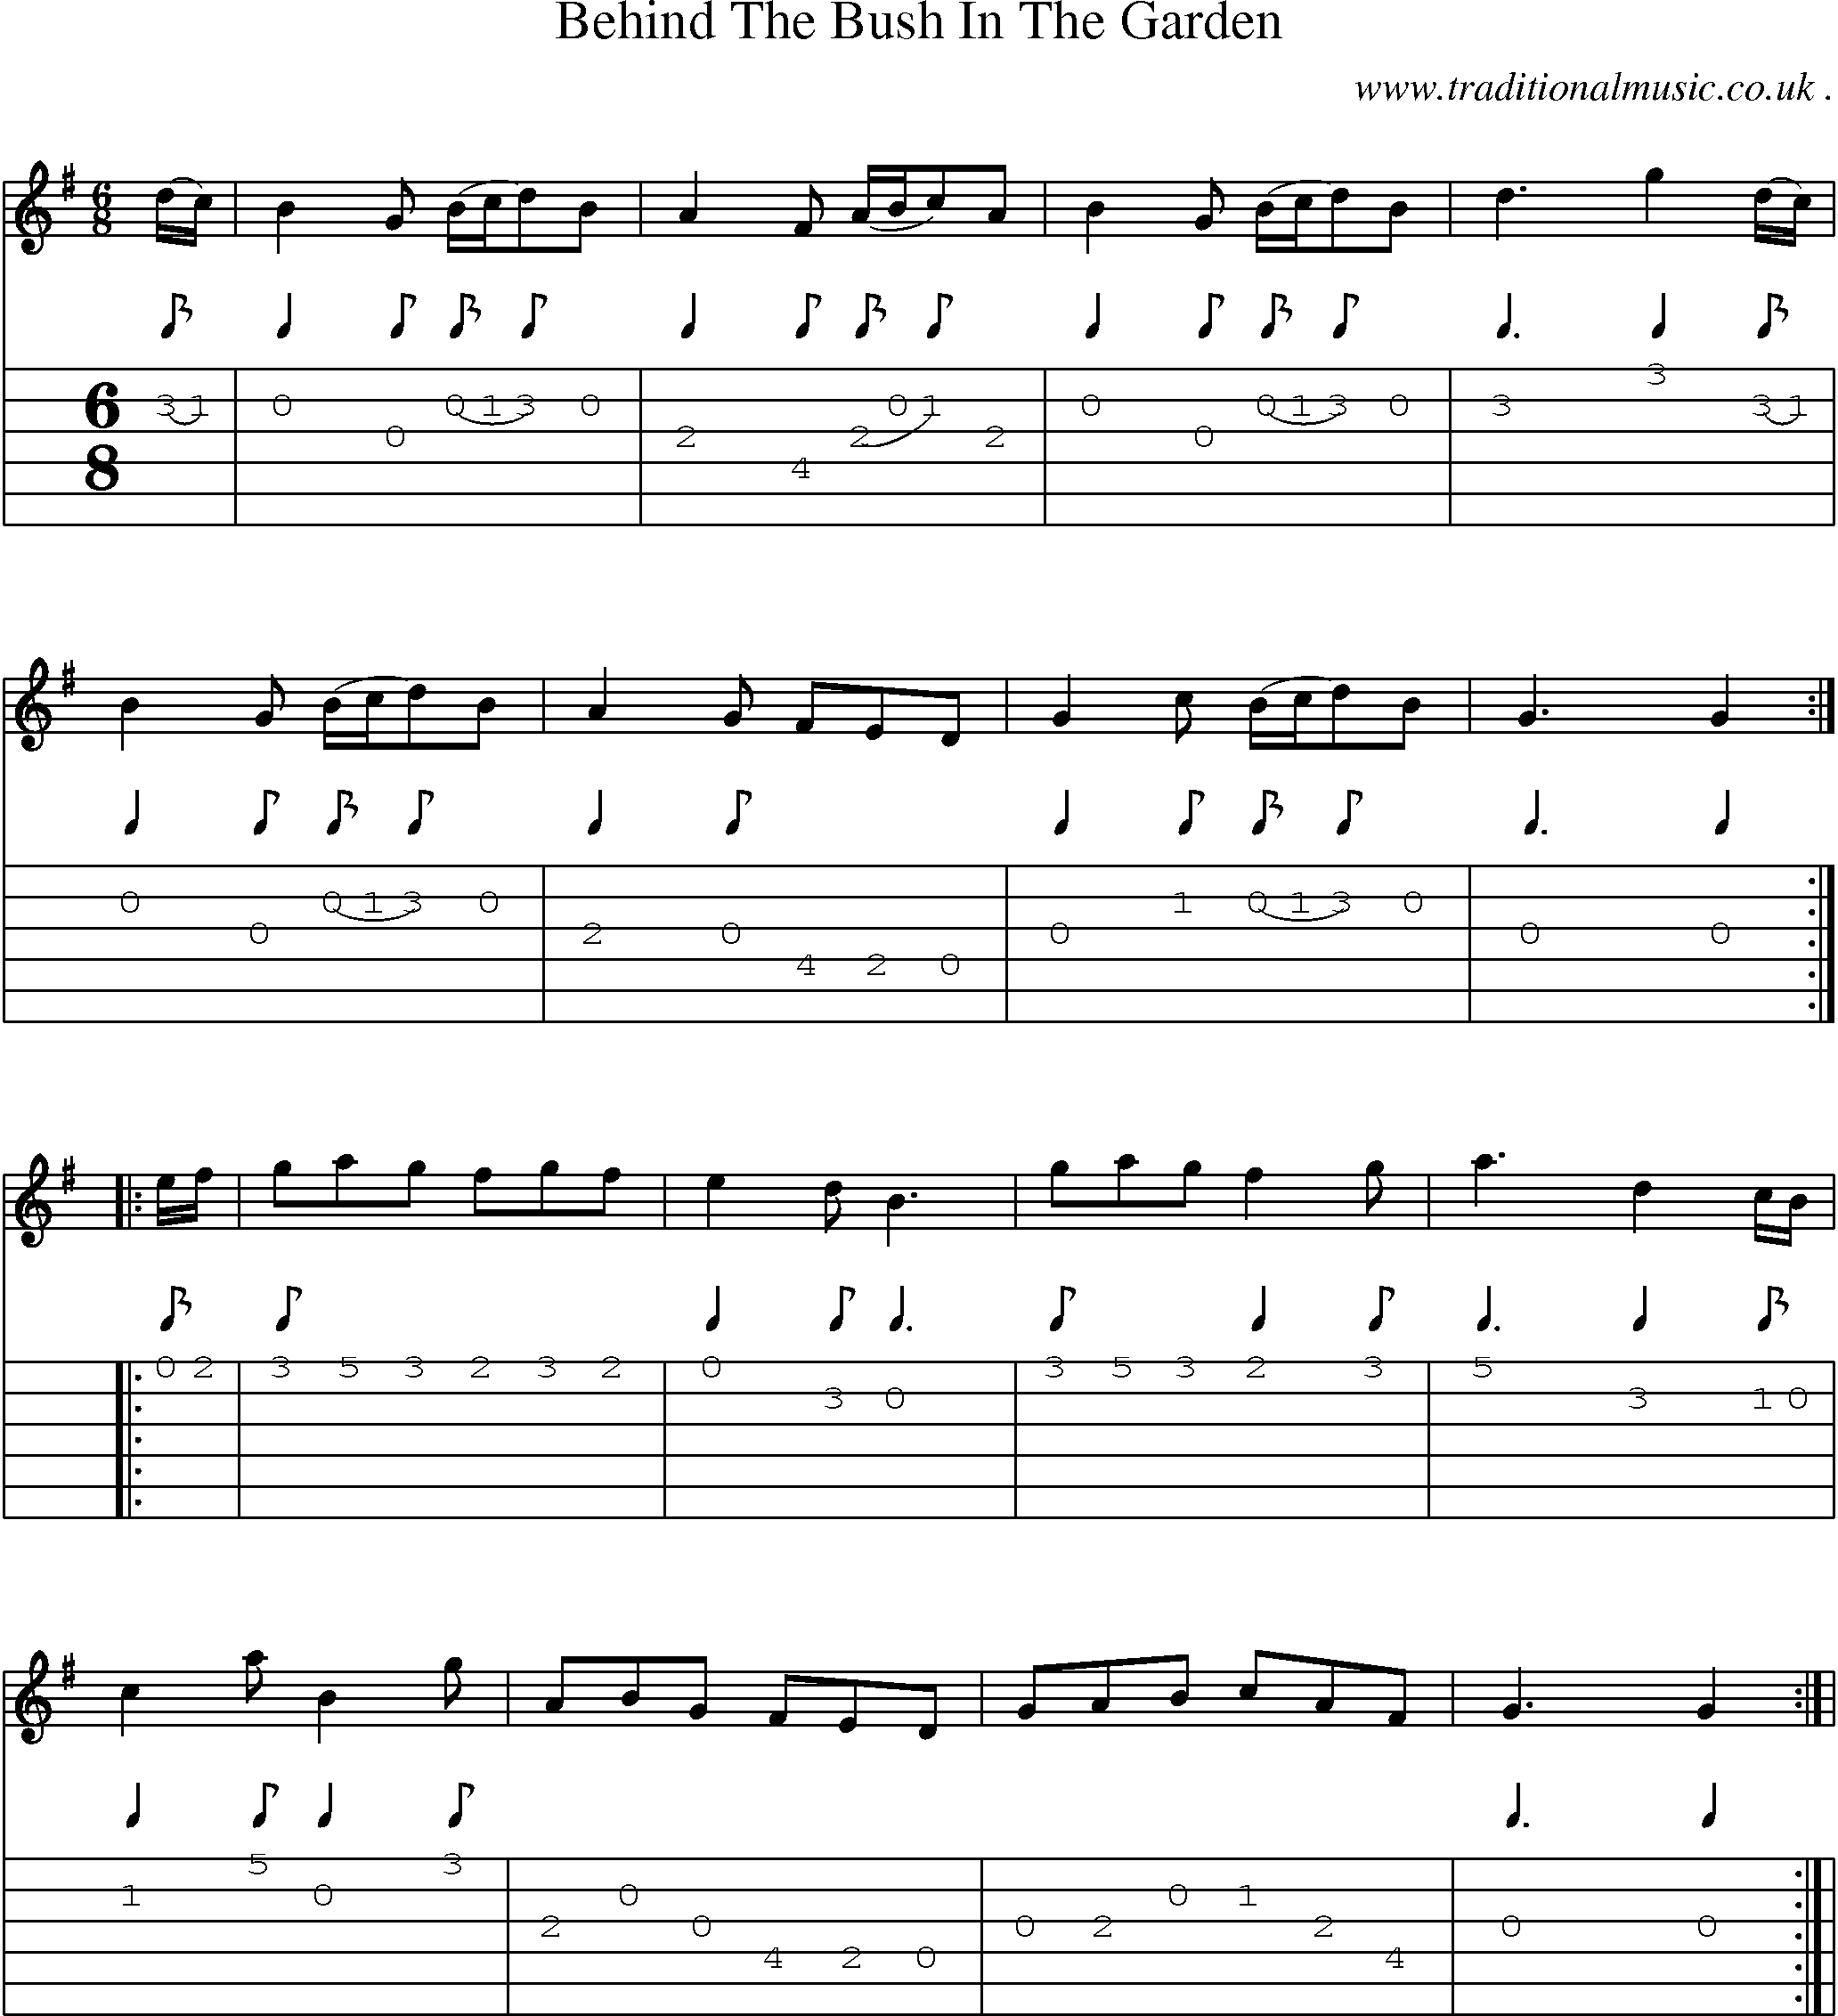 Sheet-Music and Guitar Tabs for Behind The Bush In The Garden